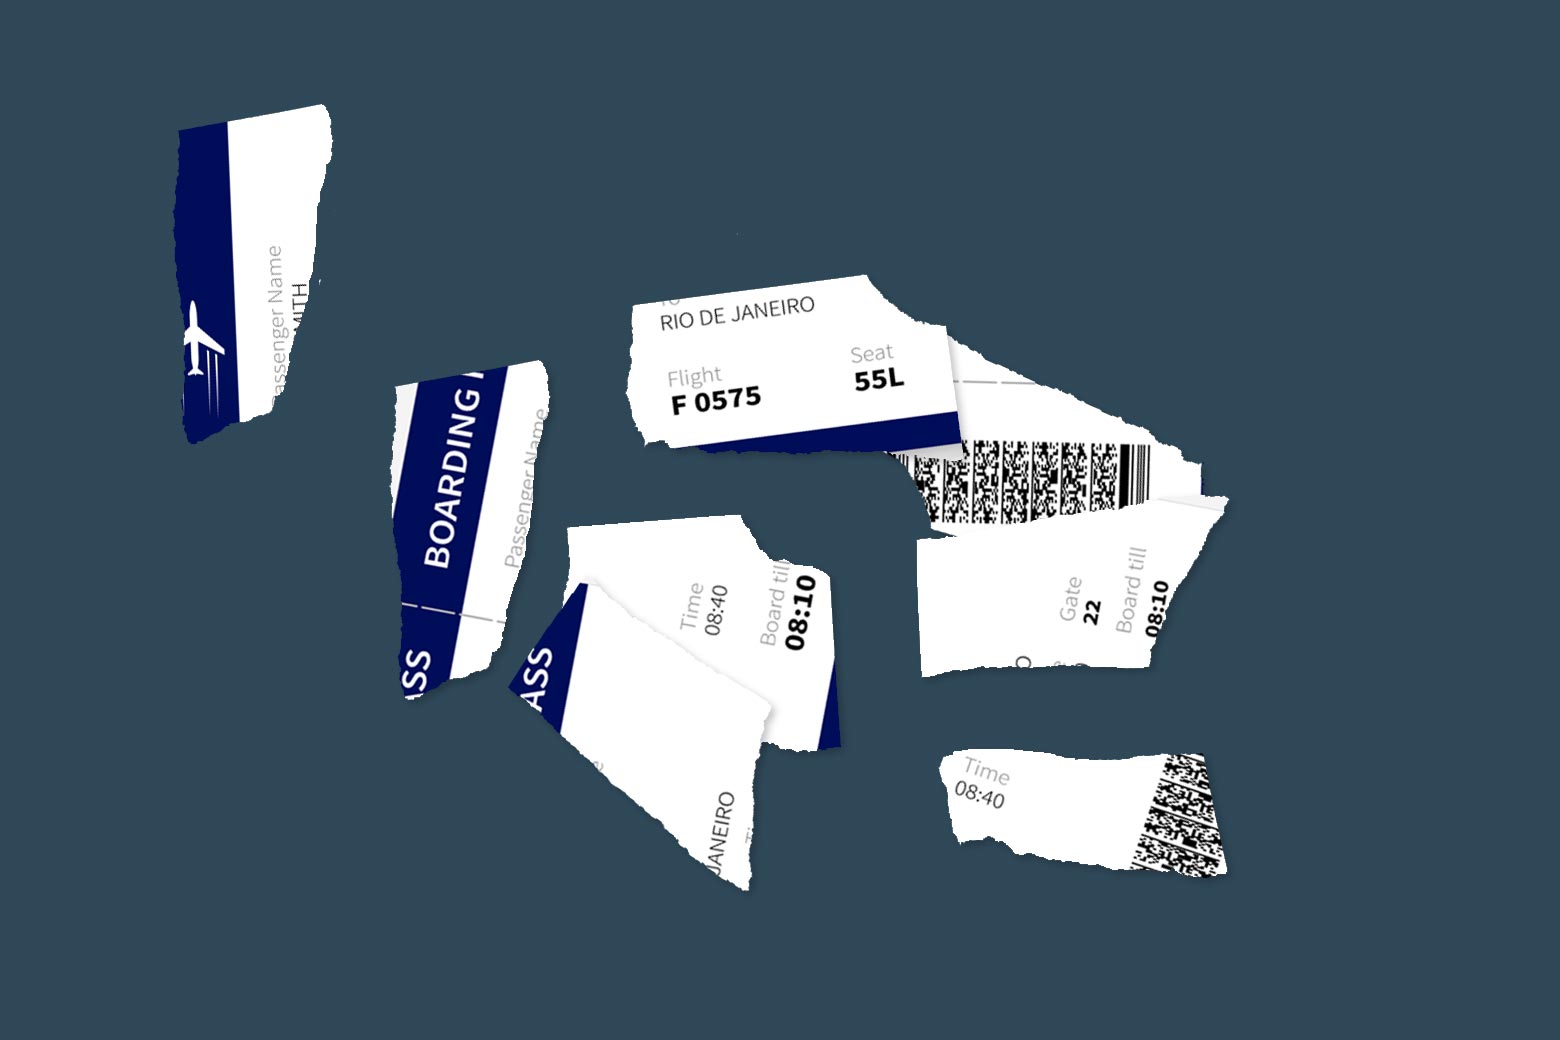 Ripped-up airline ticket.